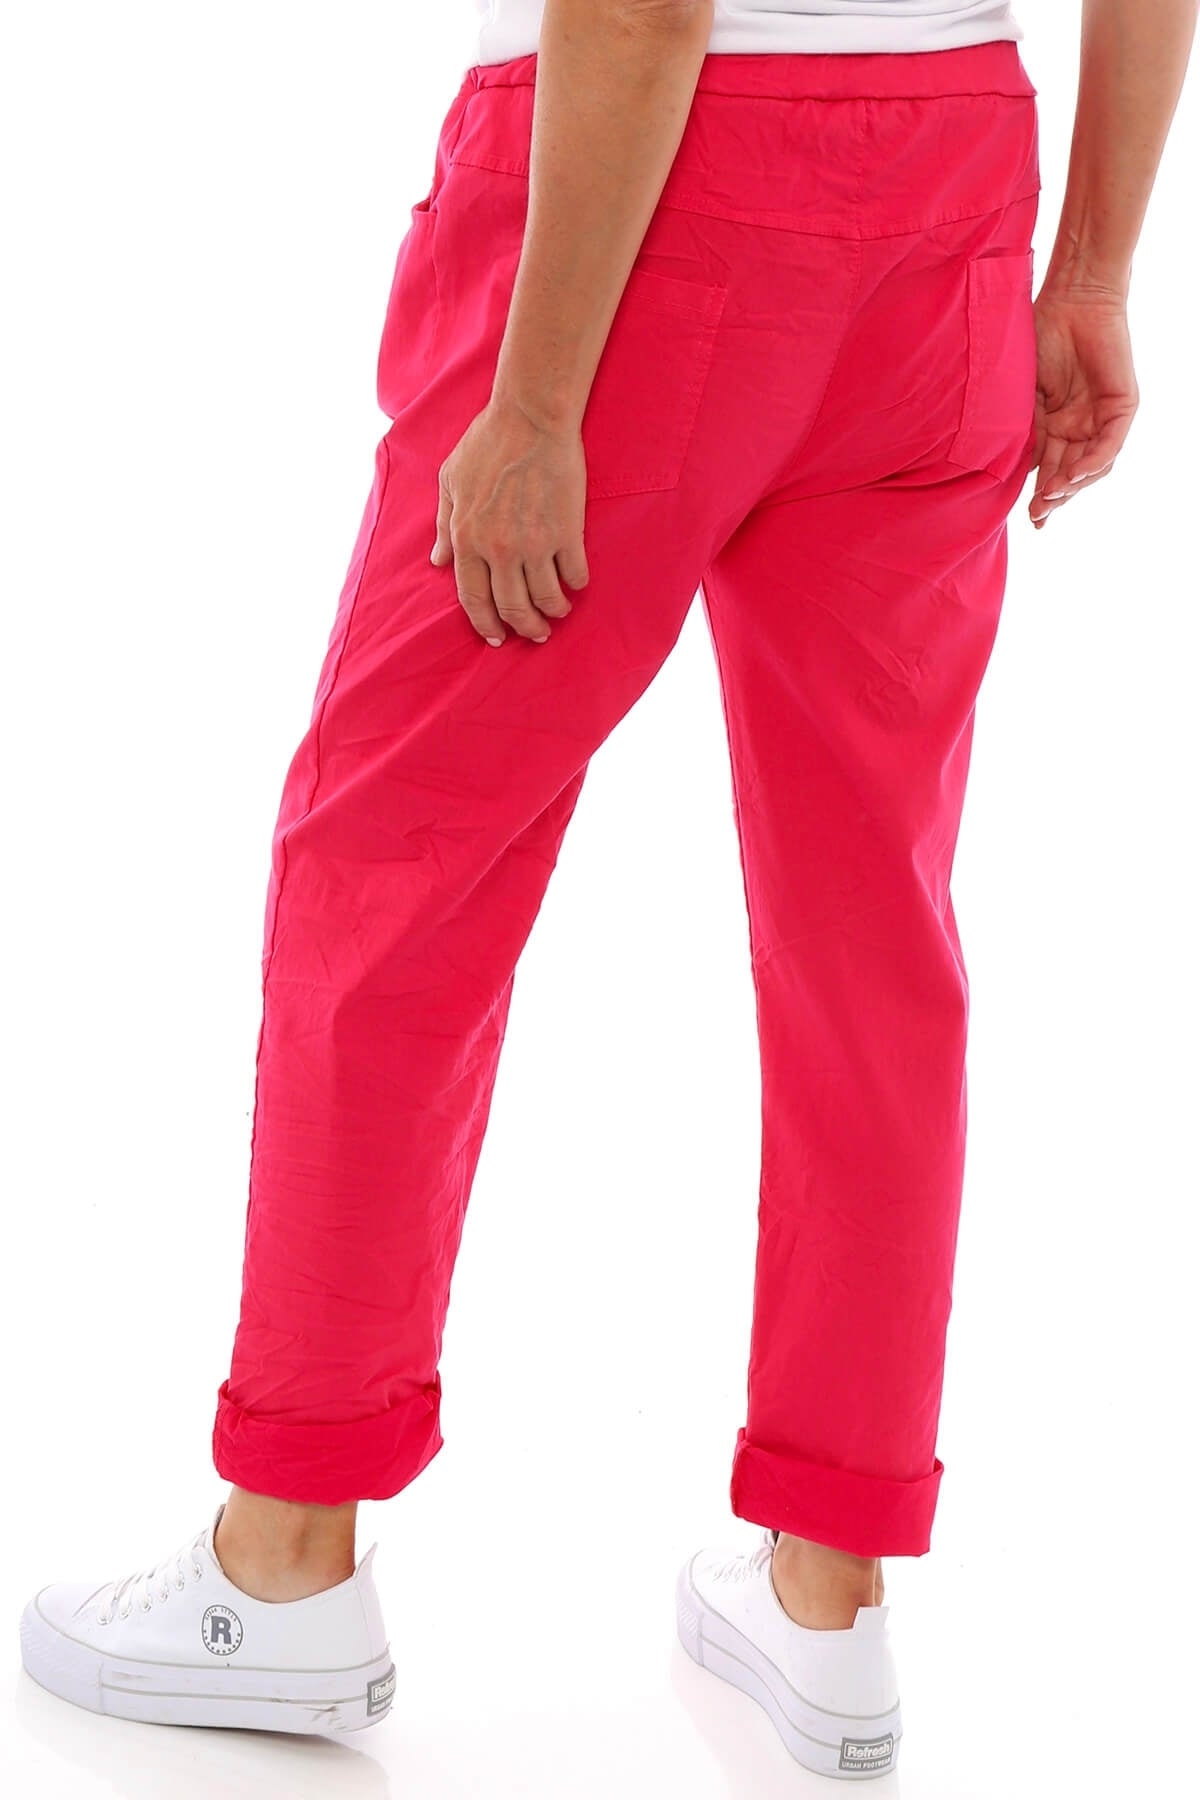 Yarwell Joggers Hot Pink